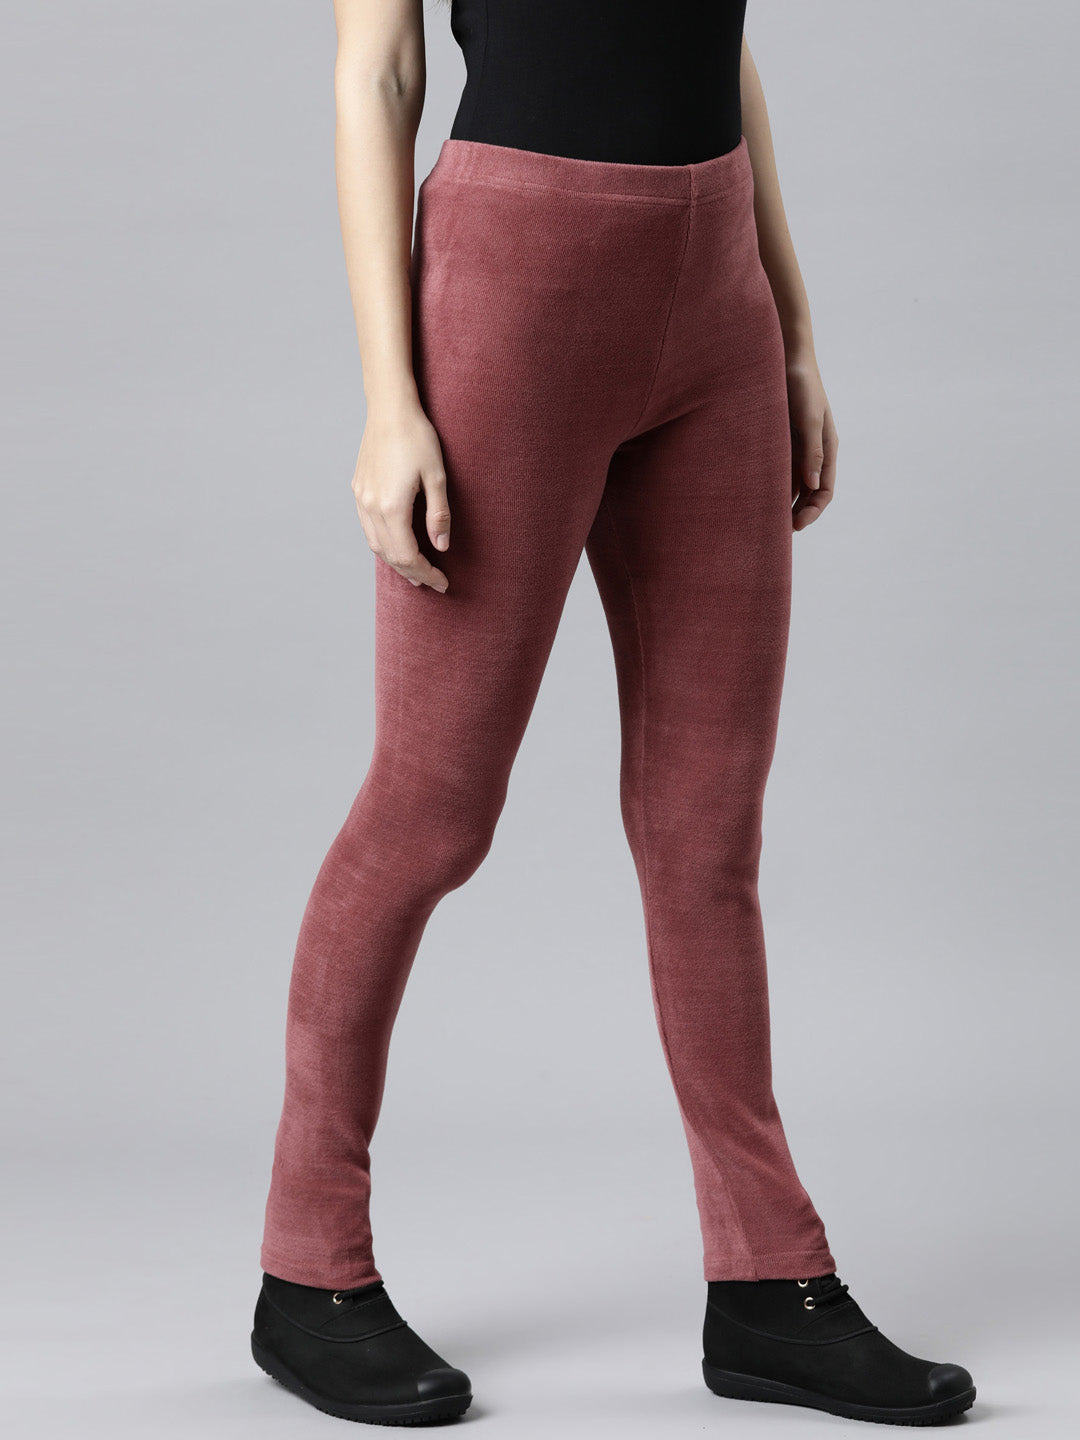 GO COLORS Women Solid Dark Pink Ankle Length Leggings : Amazon.in: Fashion